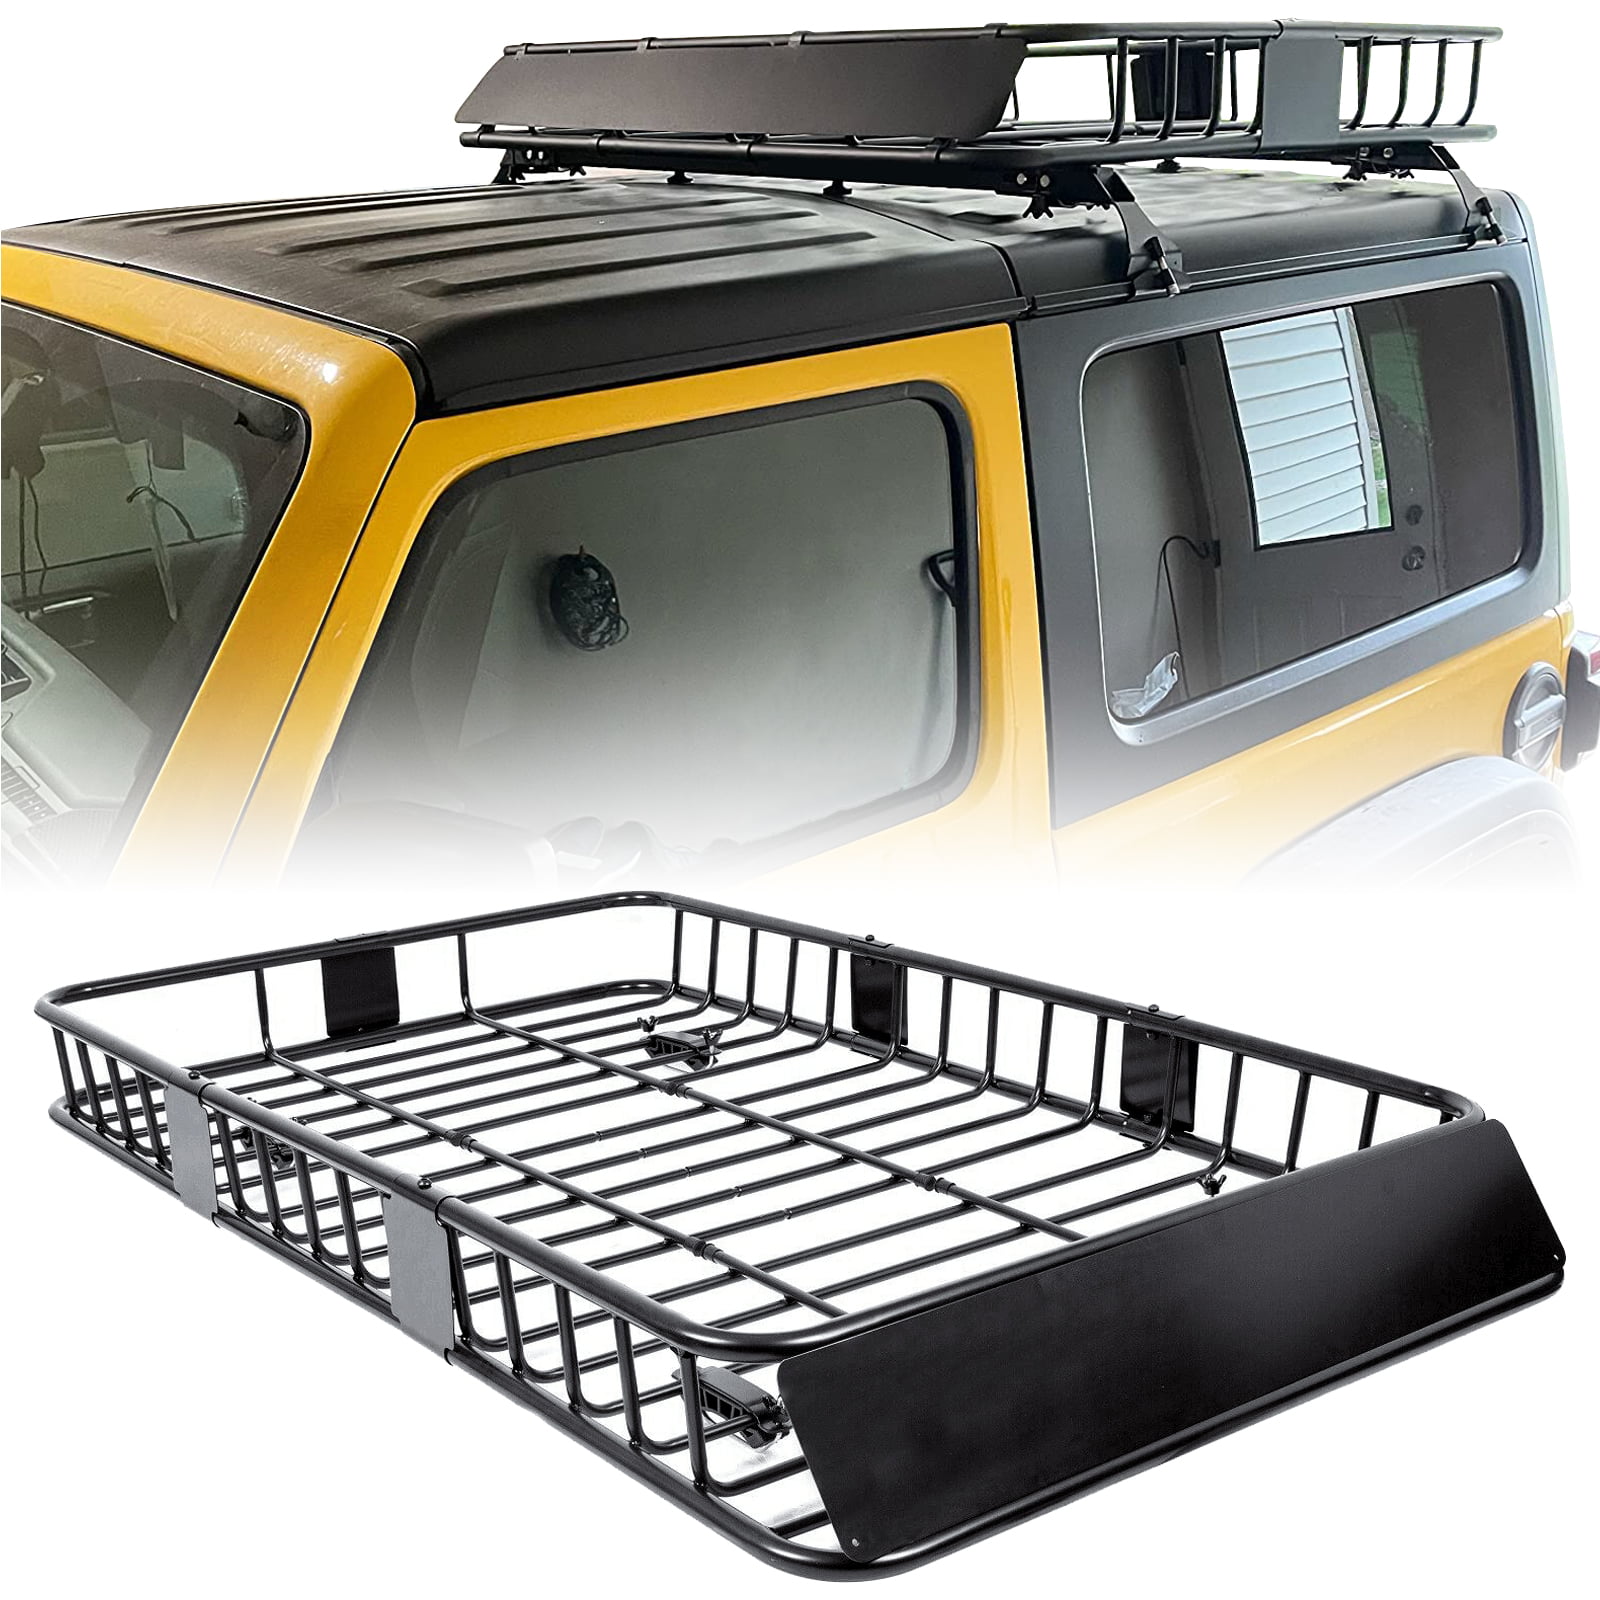 64 Universal Black Roof Rack Cargo with Extension Roof Basket Car Top Luggage Holder Carrier Basket Travel SUV 